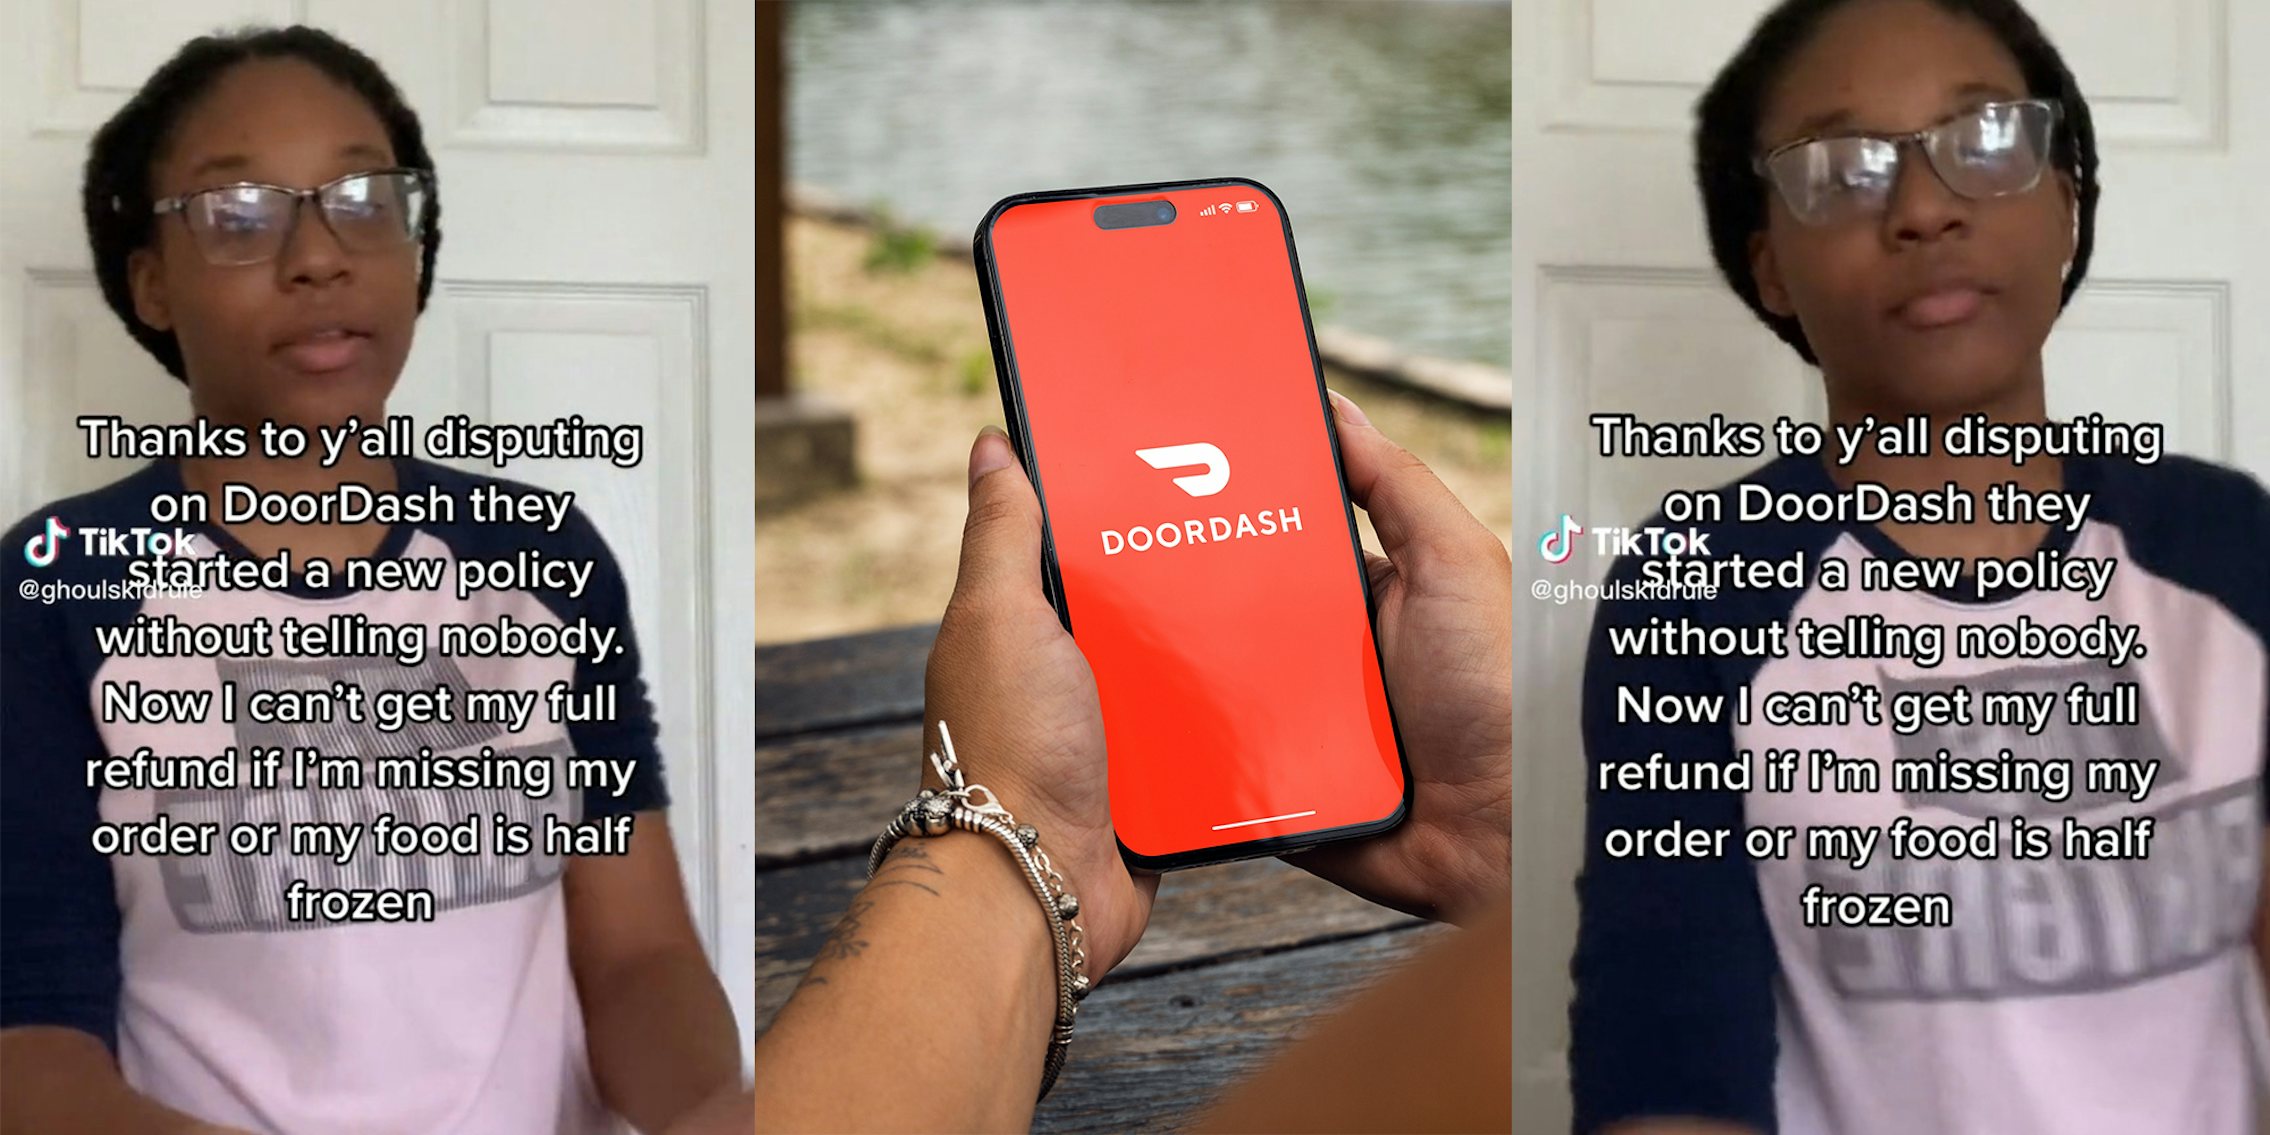 Customer Claims DoorDash Rolled Out New Refund Policy